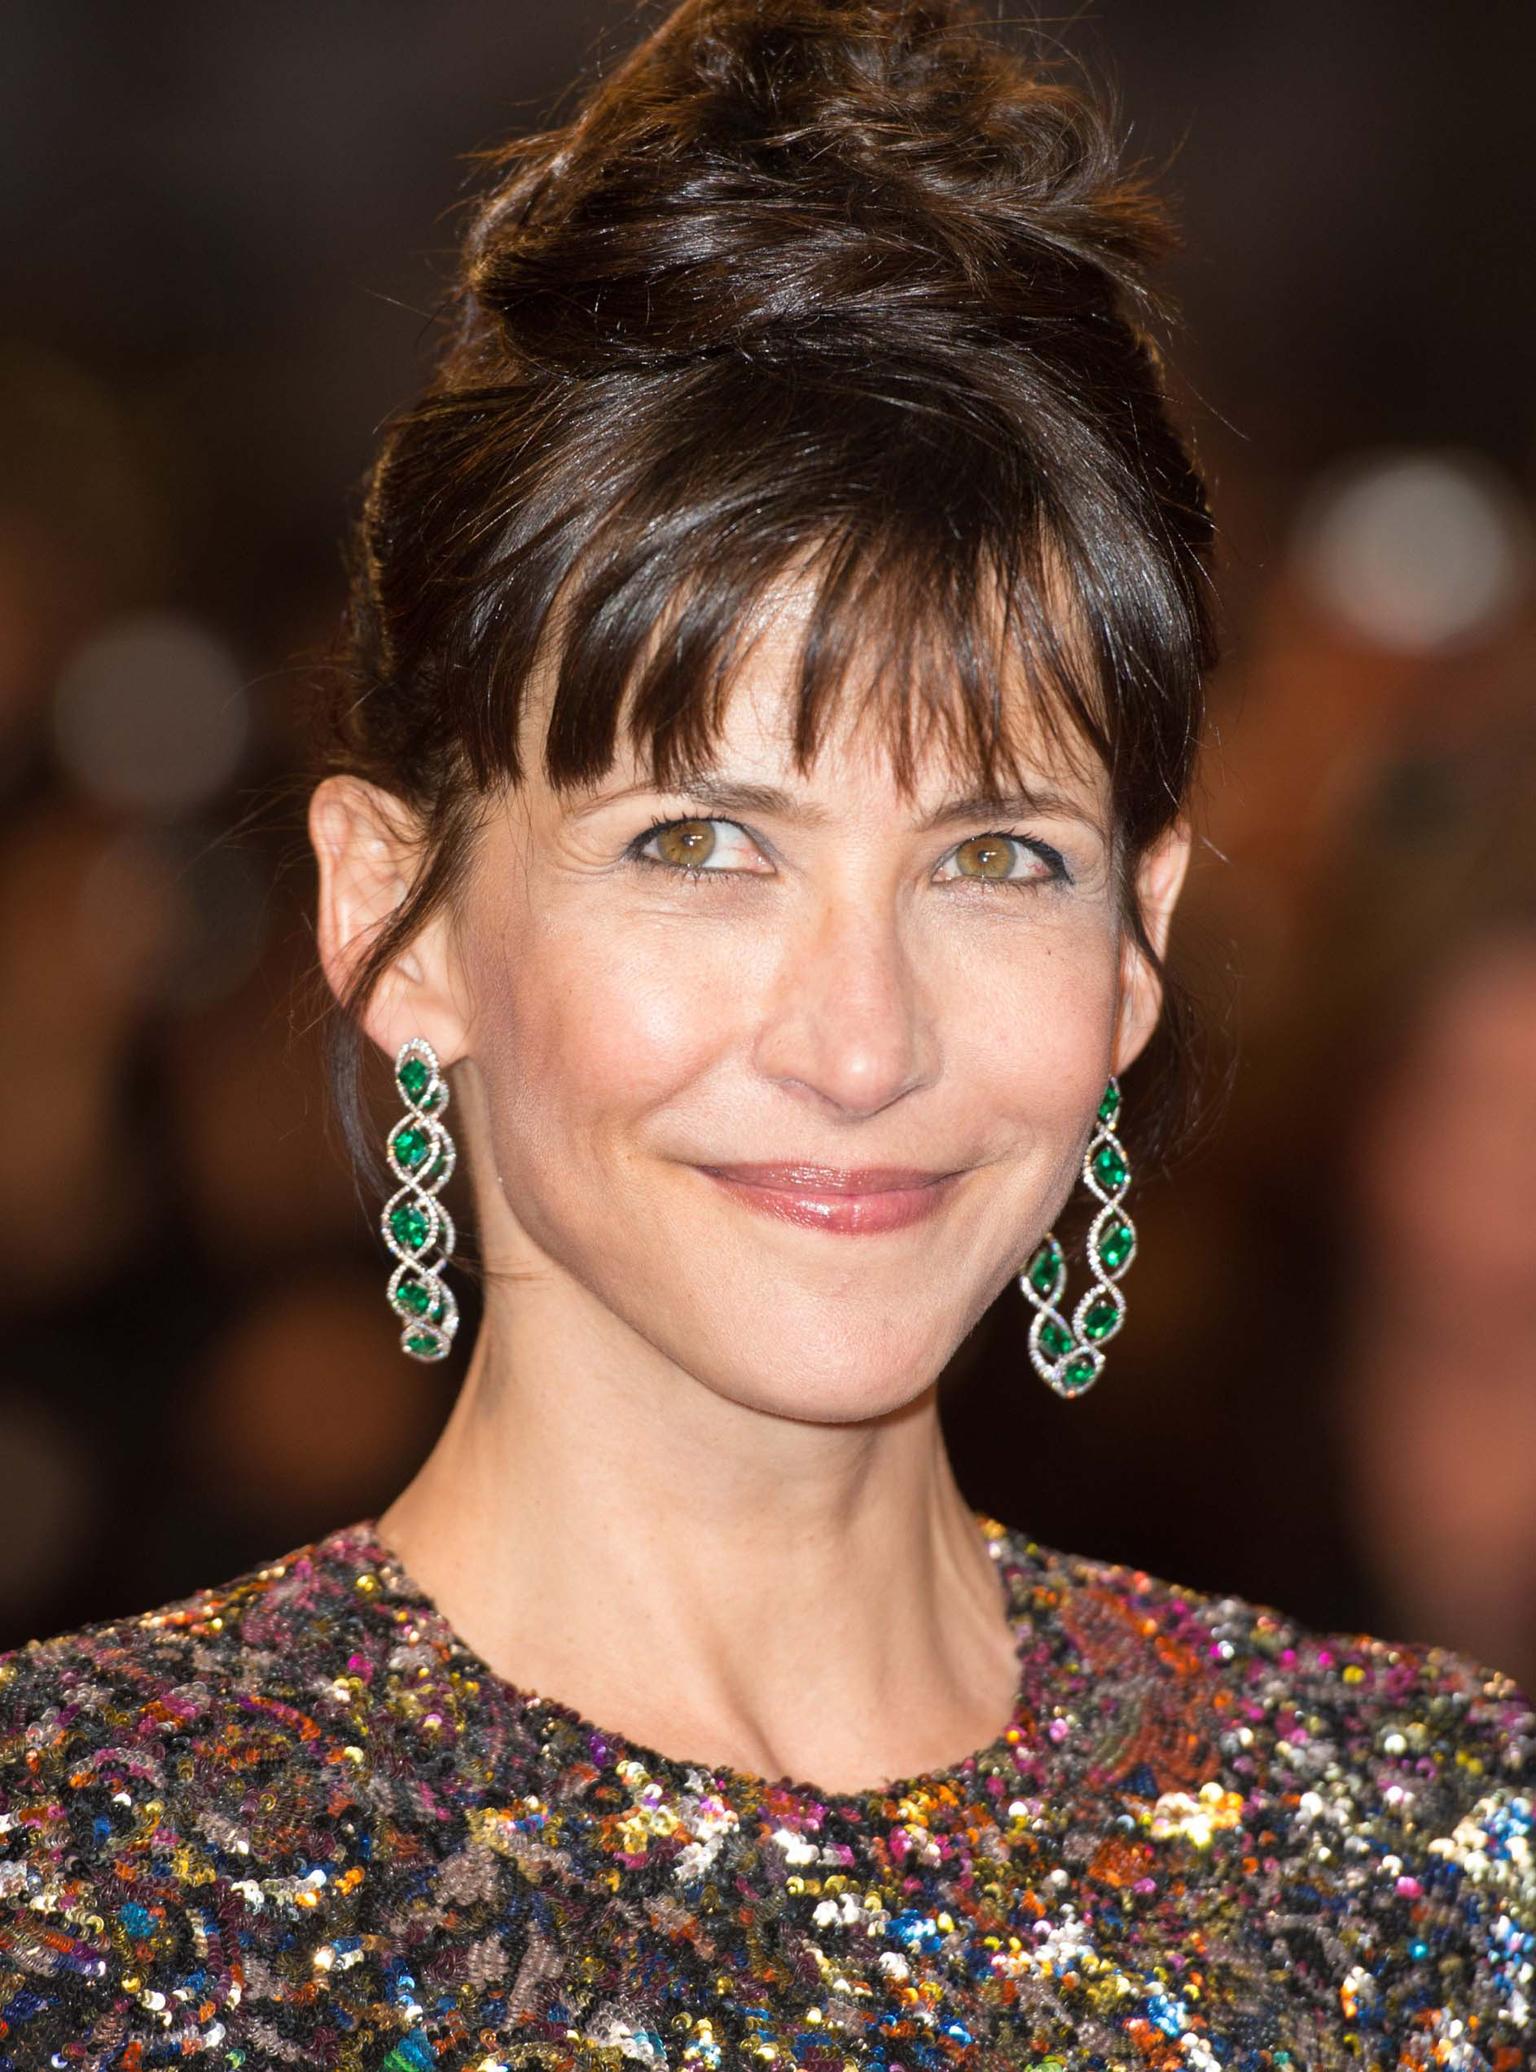 French actress and Cannes Film Festival Jury member, Sophie Marceau opted for colourful Chopard red carpet jewellery in the shape of emerald earrings set in titanium.